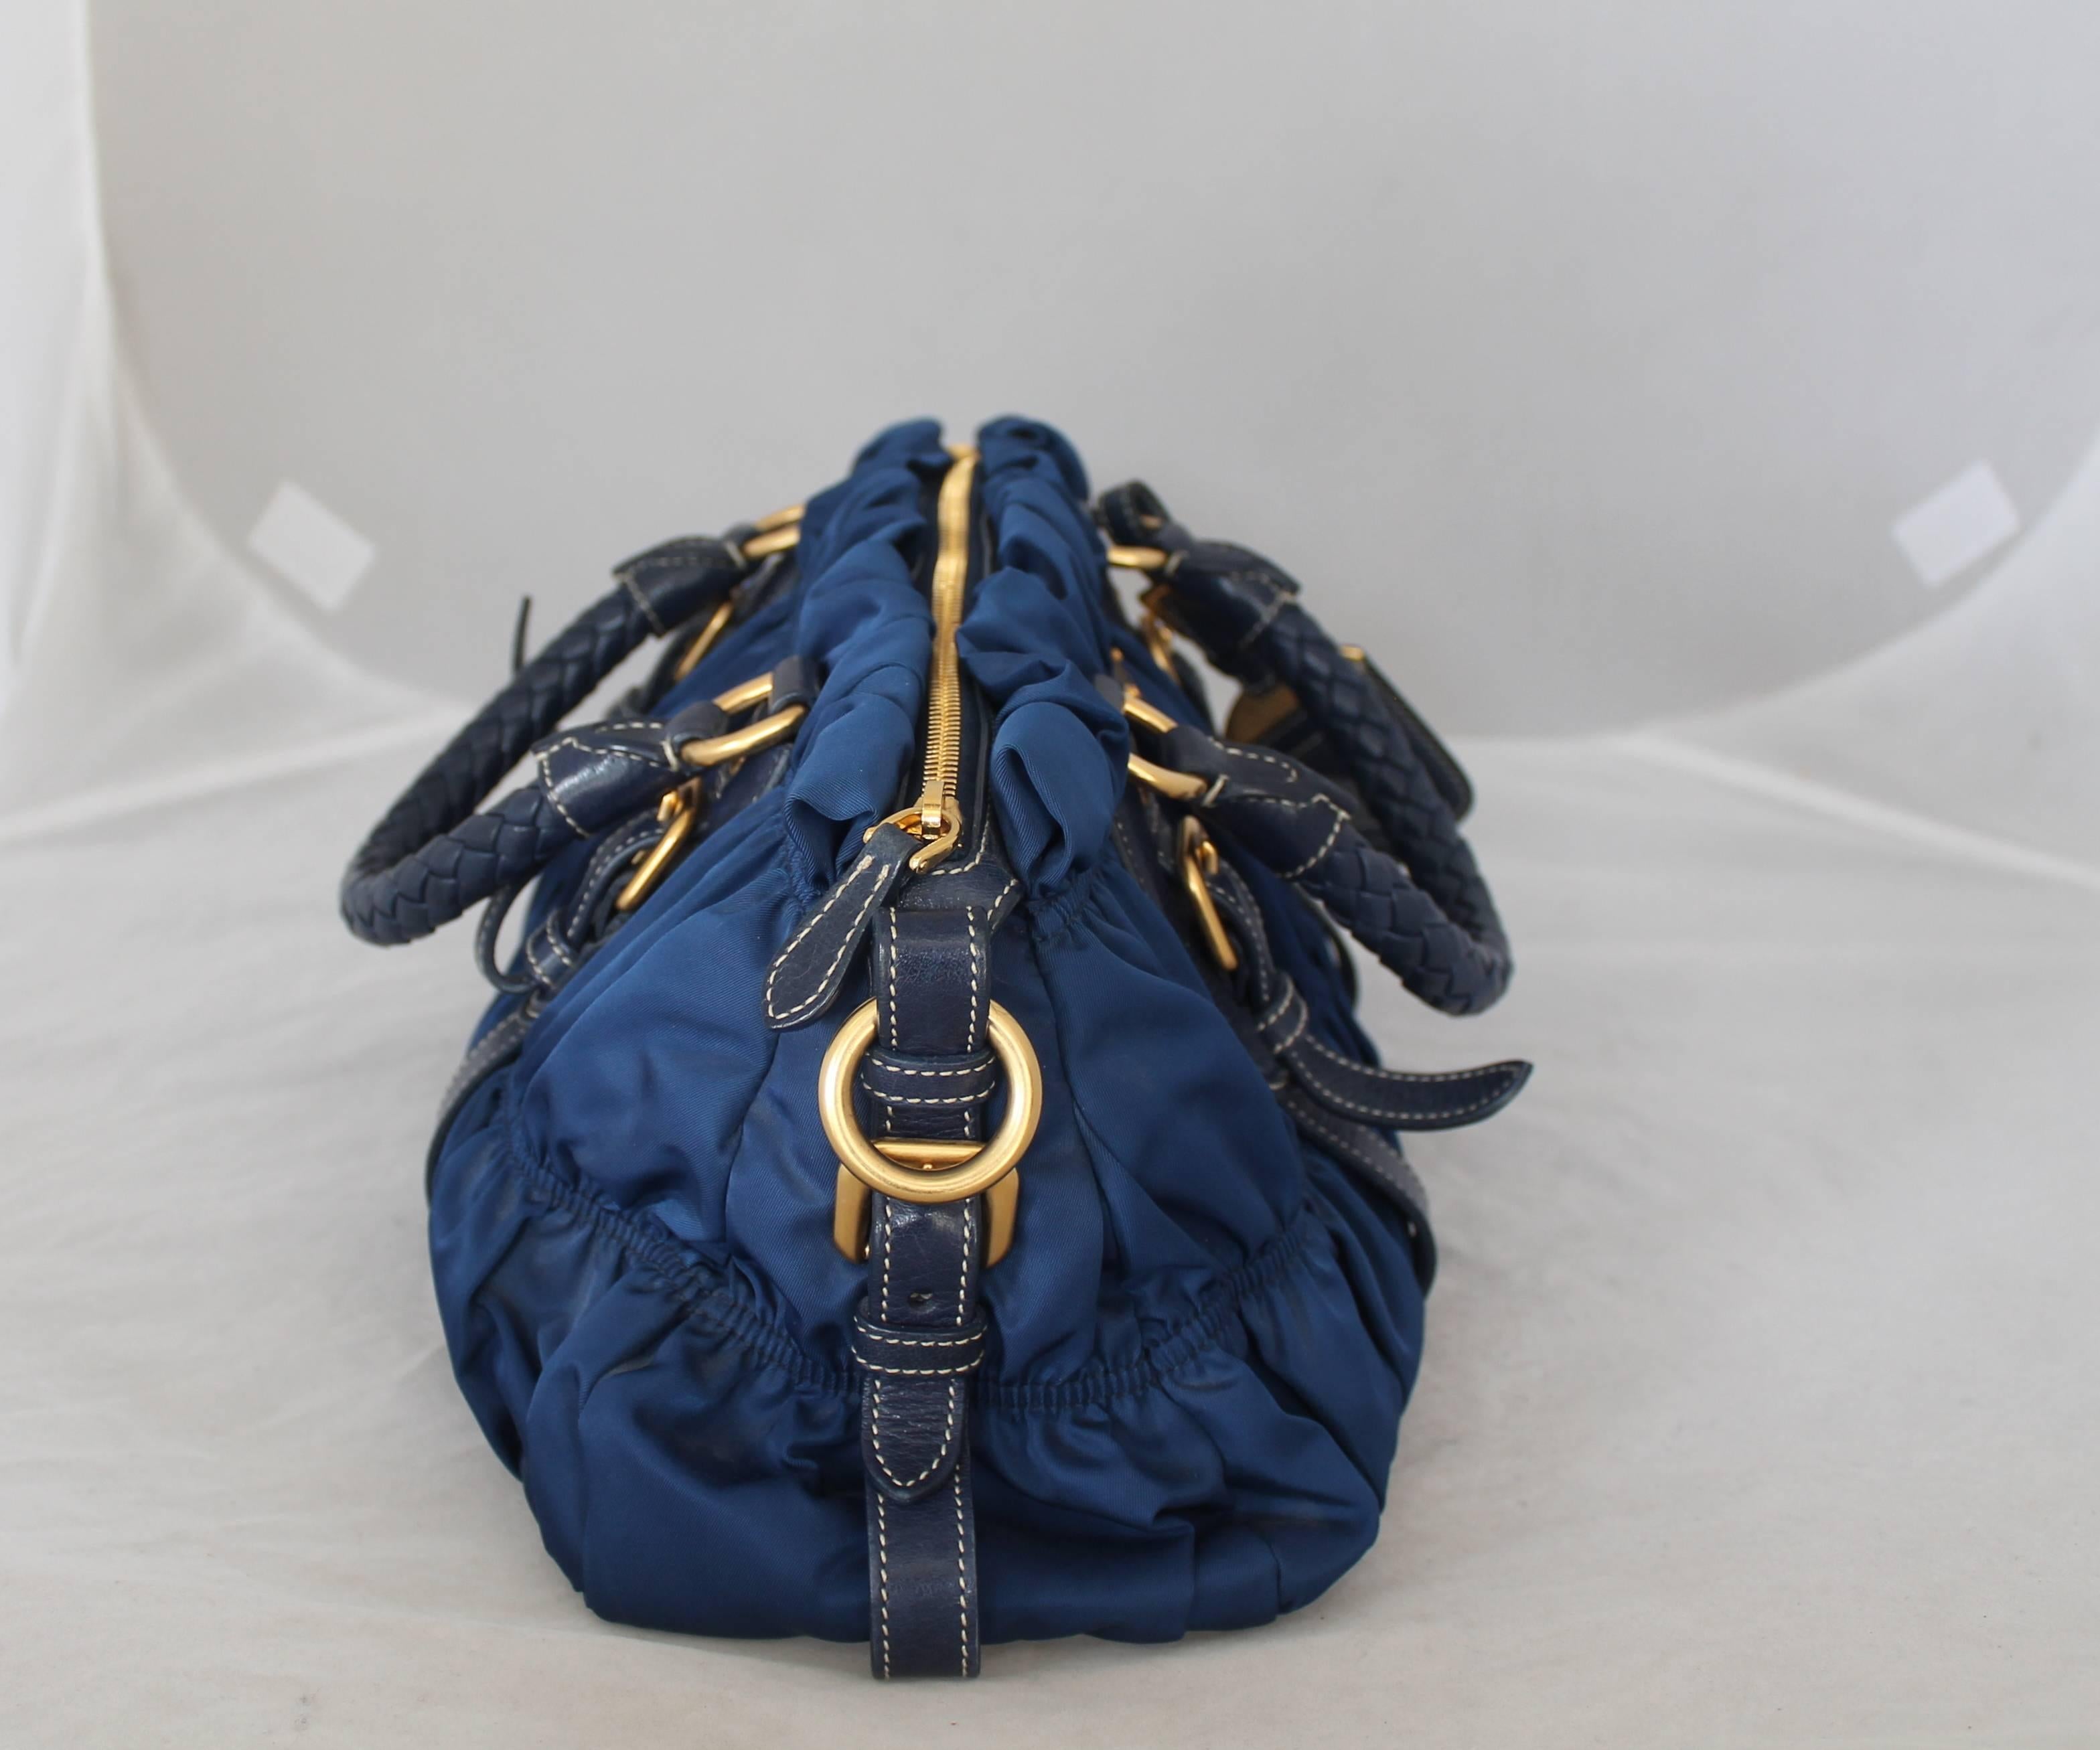 Prada Blue Nylon & Leather Ruched Bag w/ Braided Handle - GHW.  This bag is in excellent condition.  It is ruched nylon with a leather trim and a braided leather handle.  It comes with a longer strap and top handle.

Measurements:
Height: